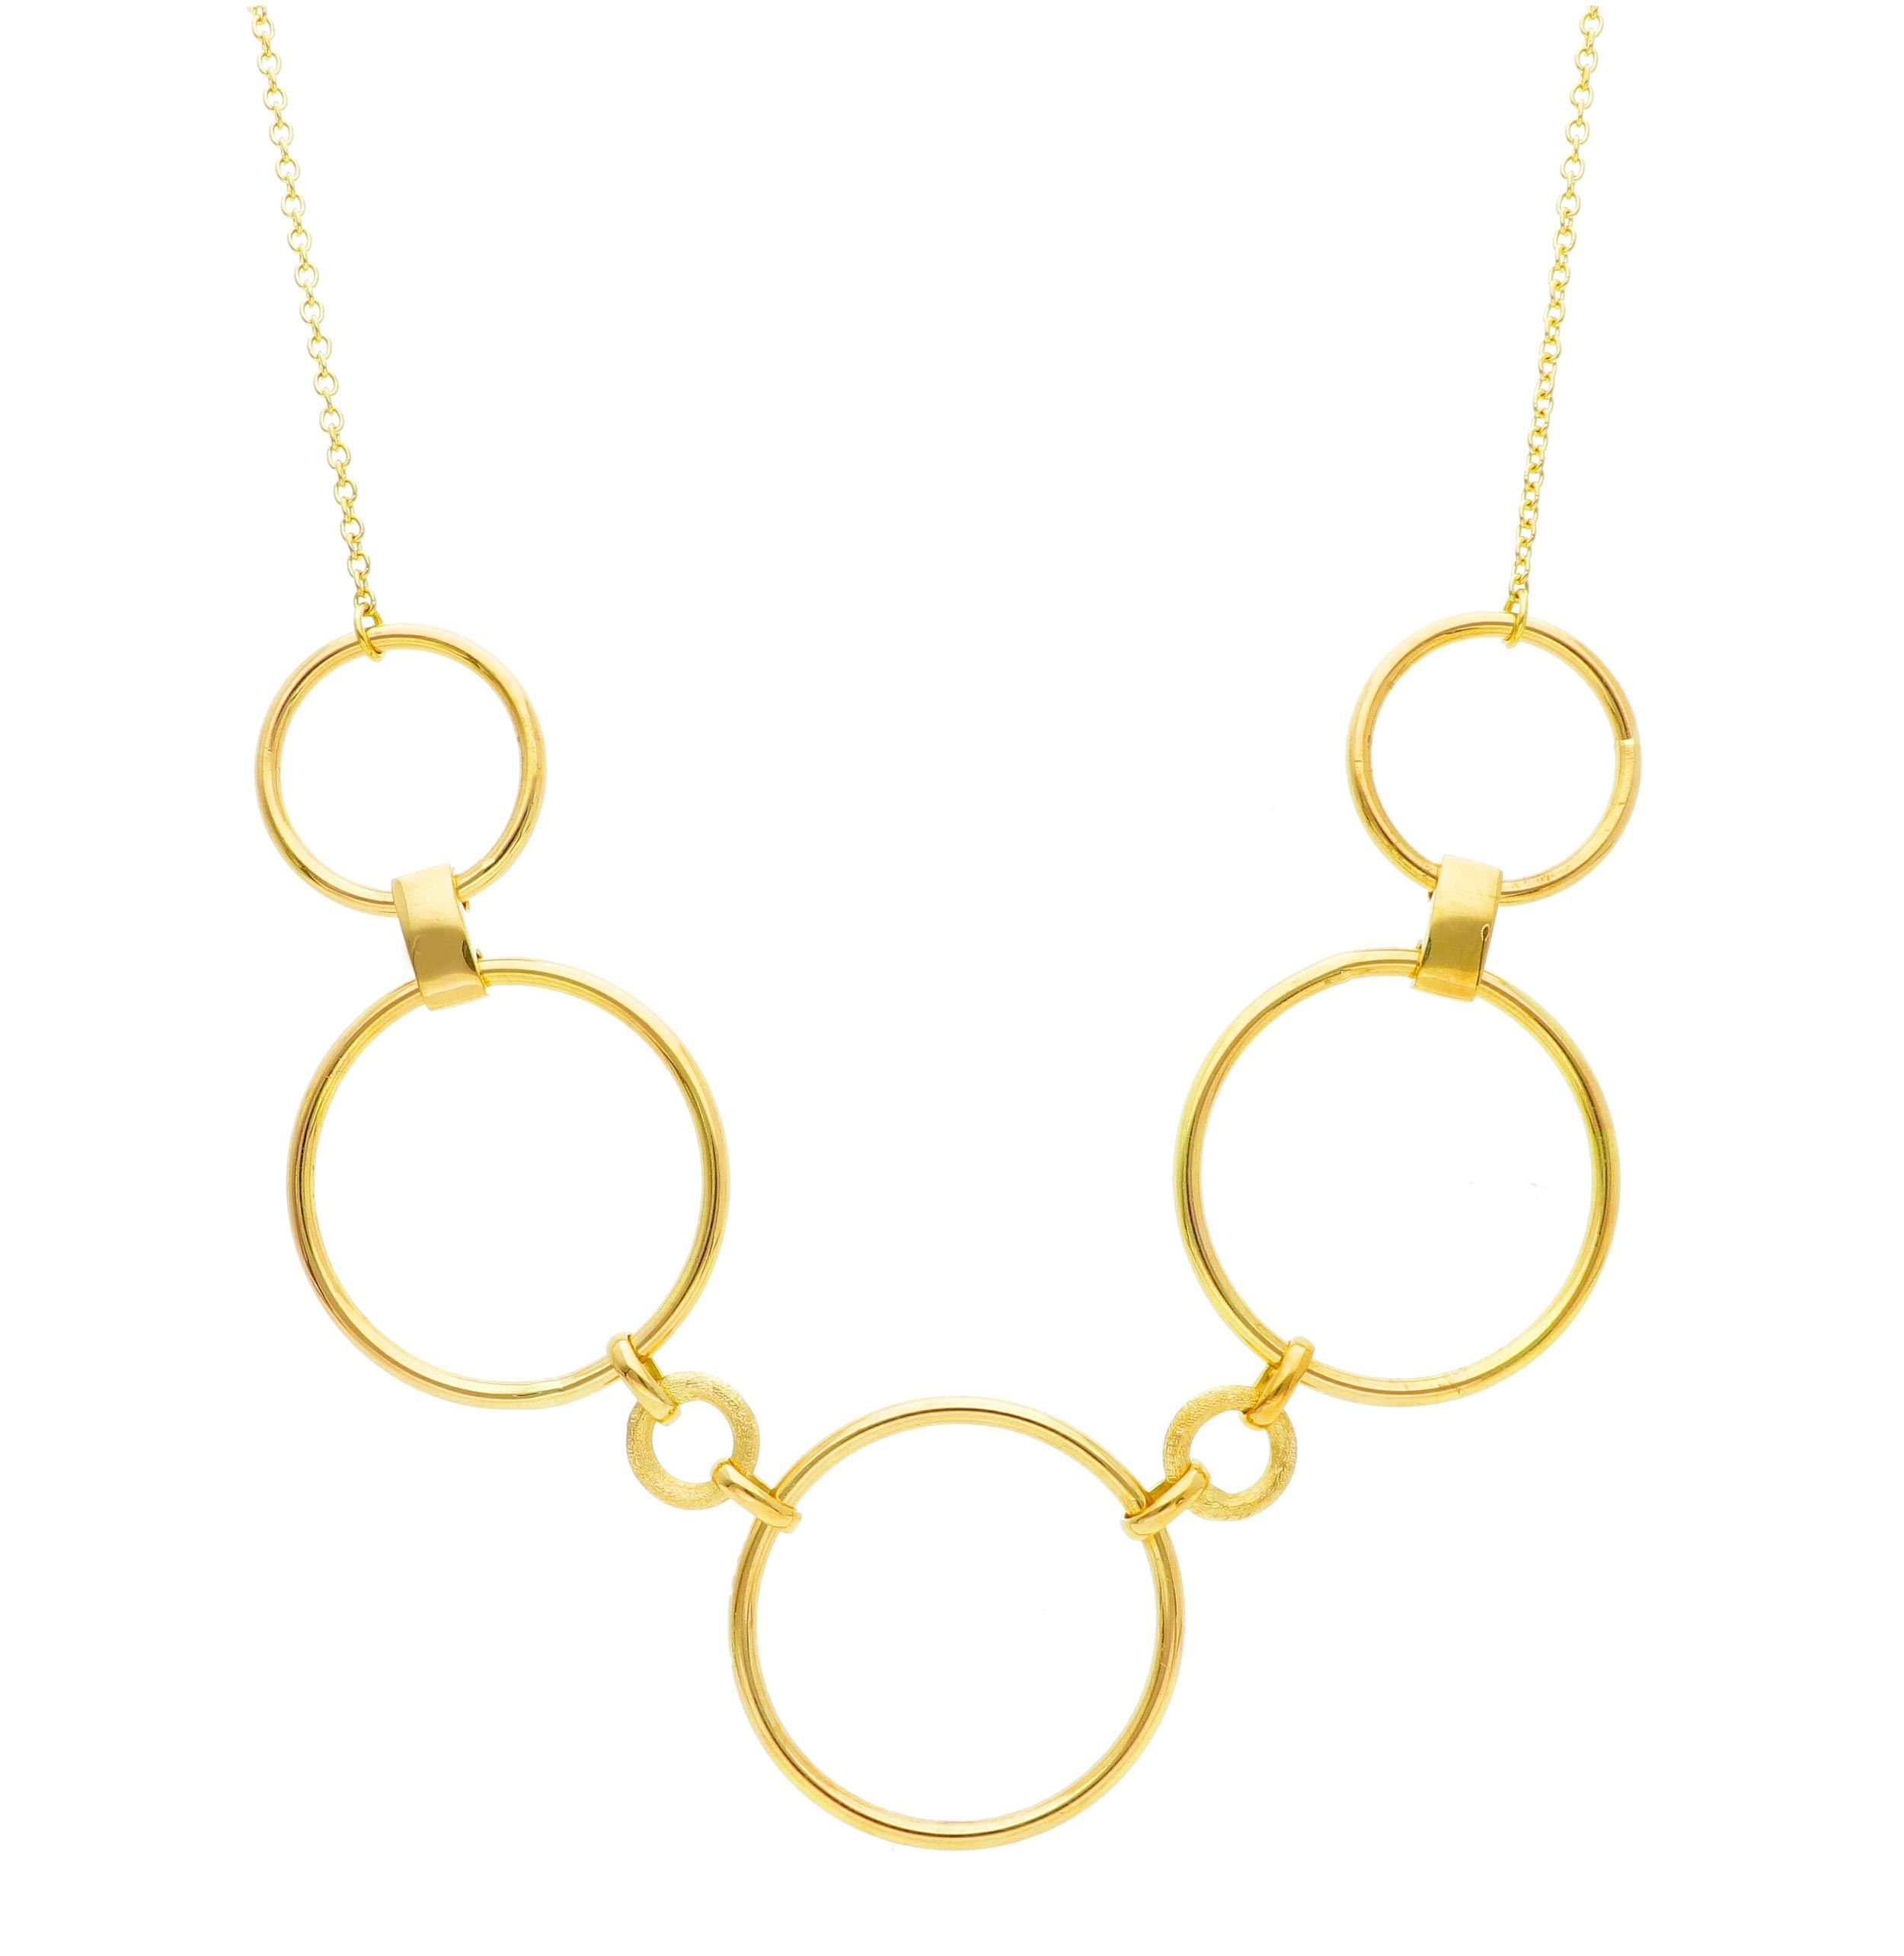 Golden necklace k14 with golden rings   (code S242439)